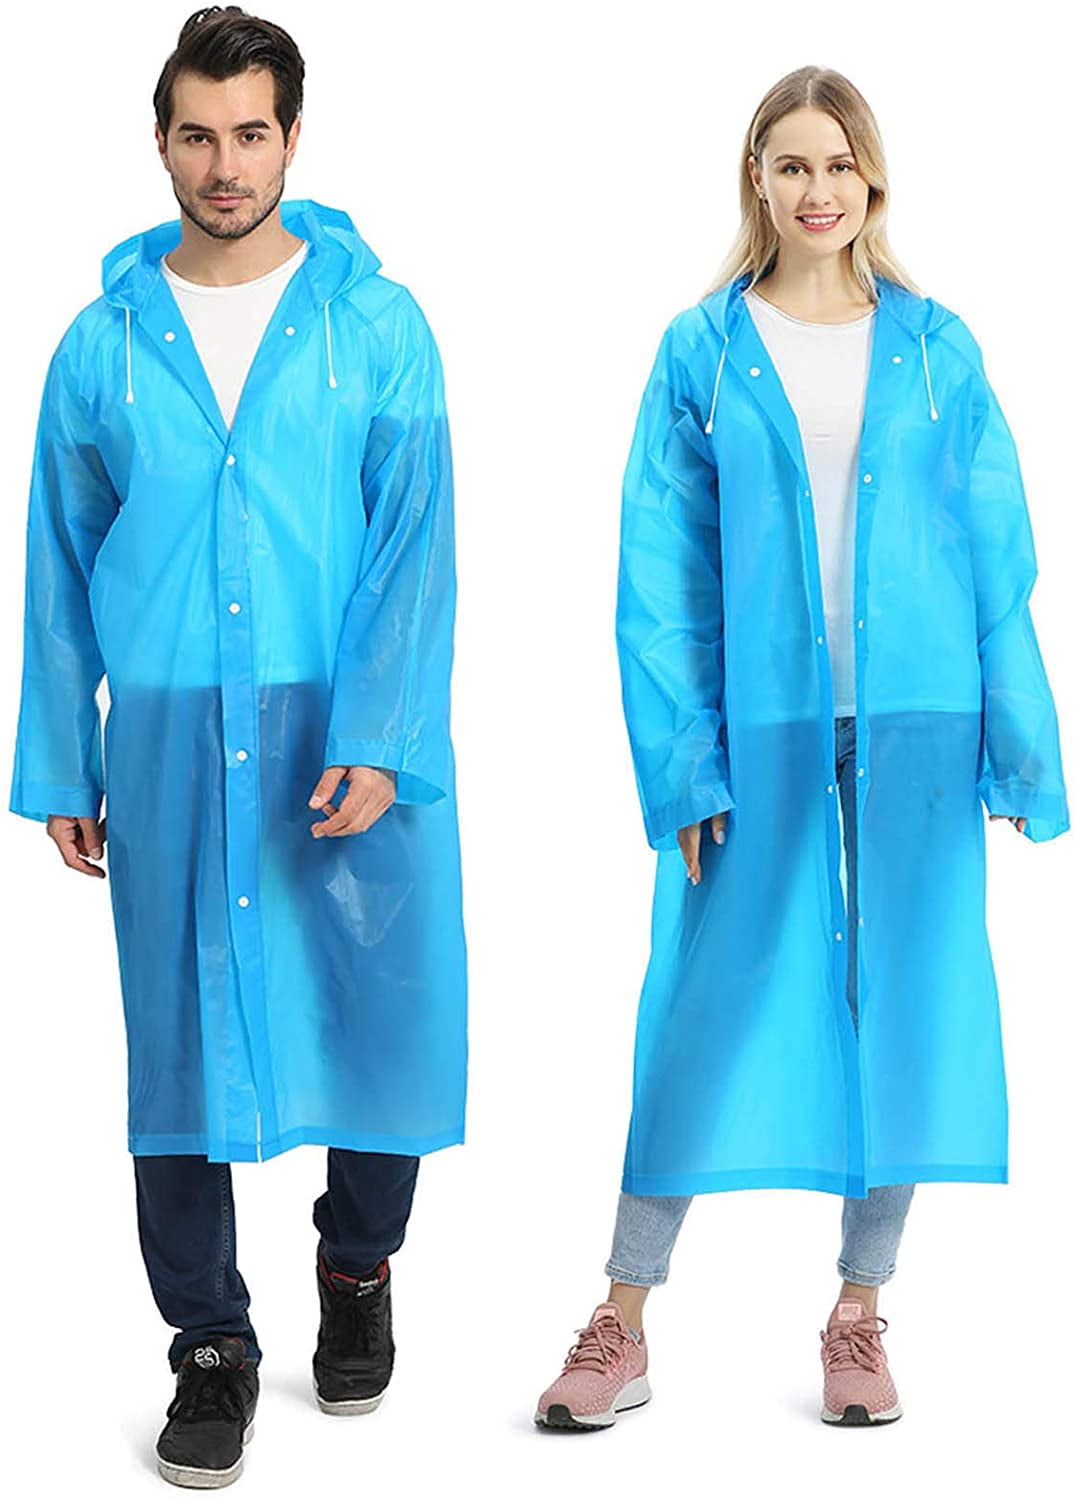 Reusable Raincoat for Adults,Non-Toxic EVA Portable Poncho with Hood and Sleeves 